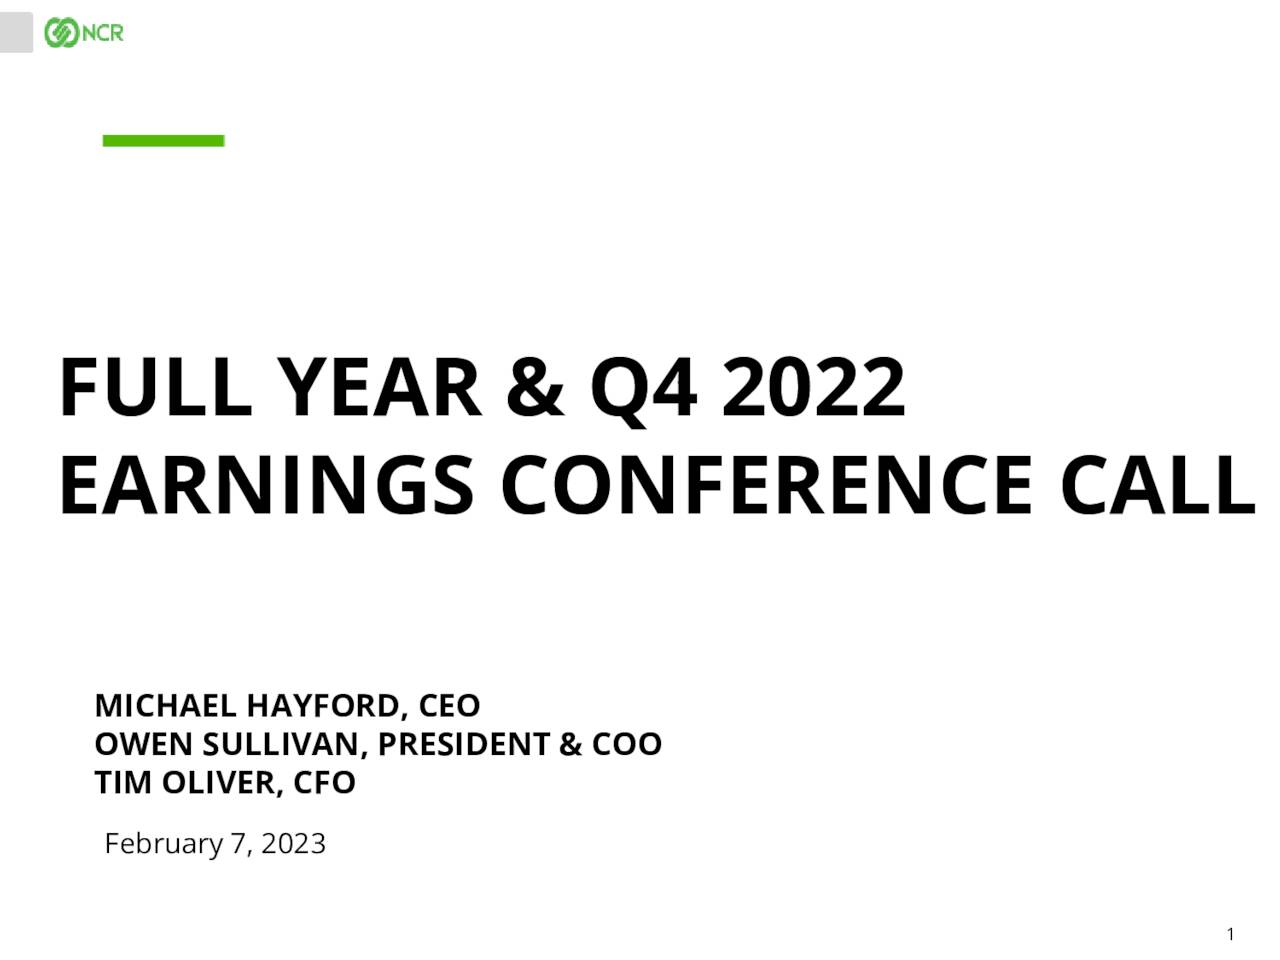 NCR Corporation 2022 Q4 Results Earnings Call Presentation (NYSE